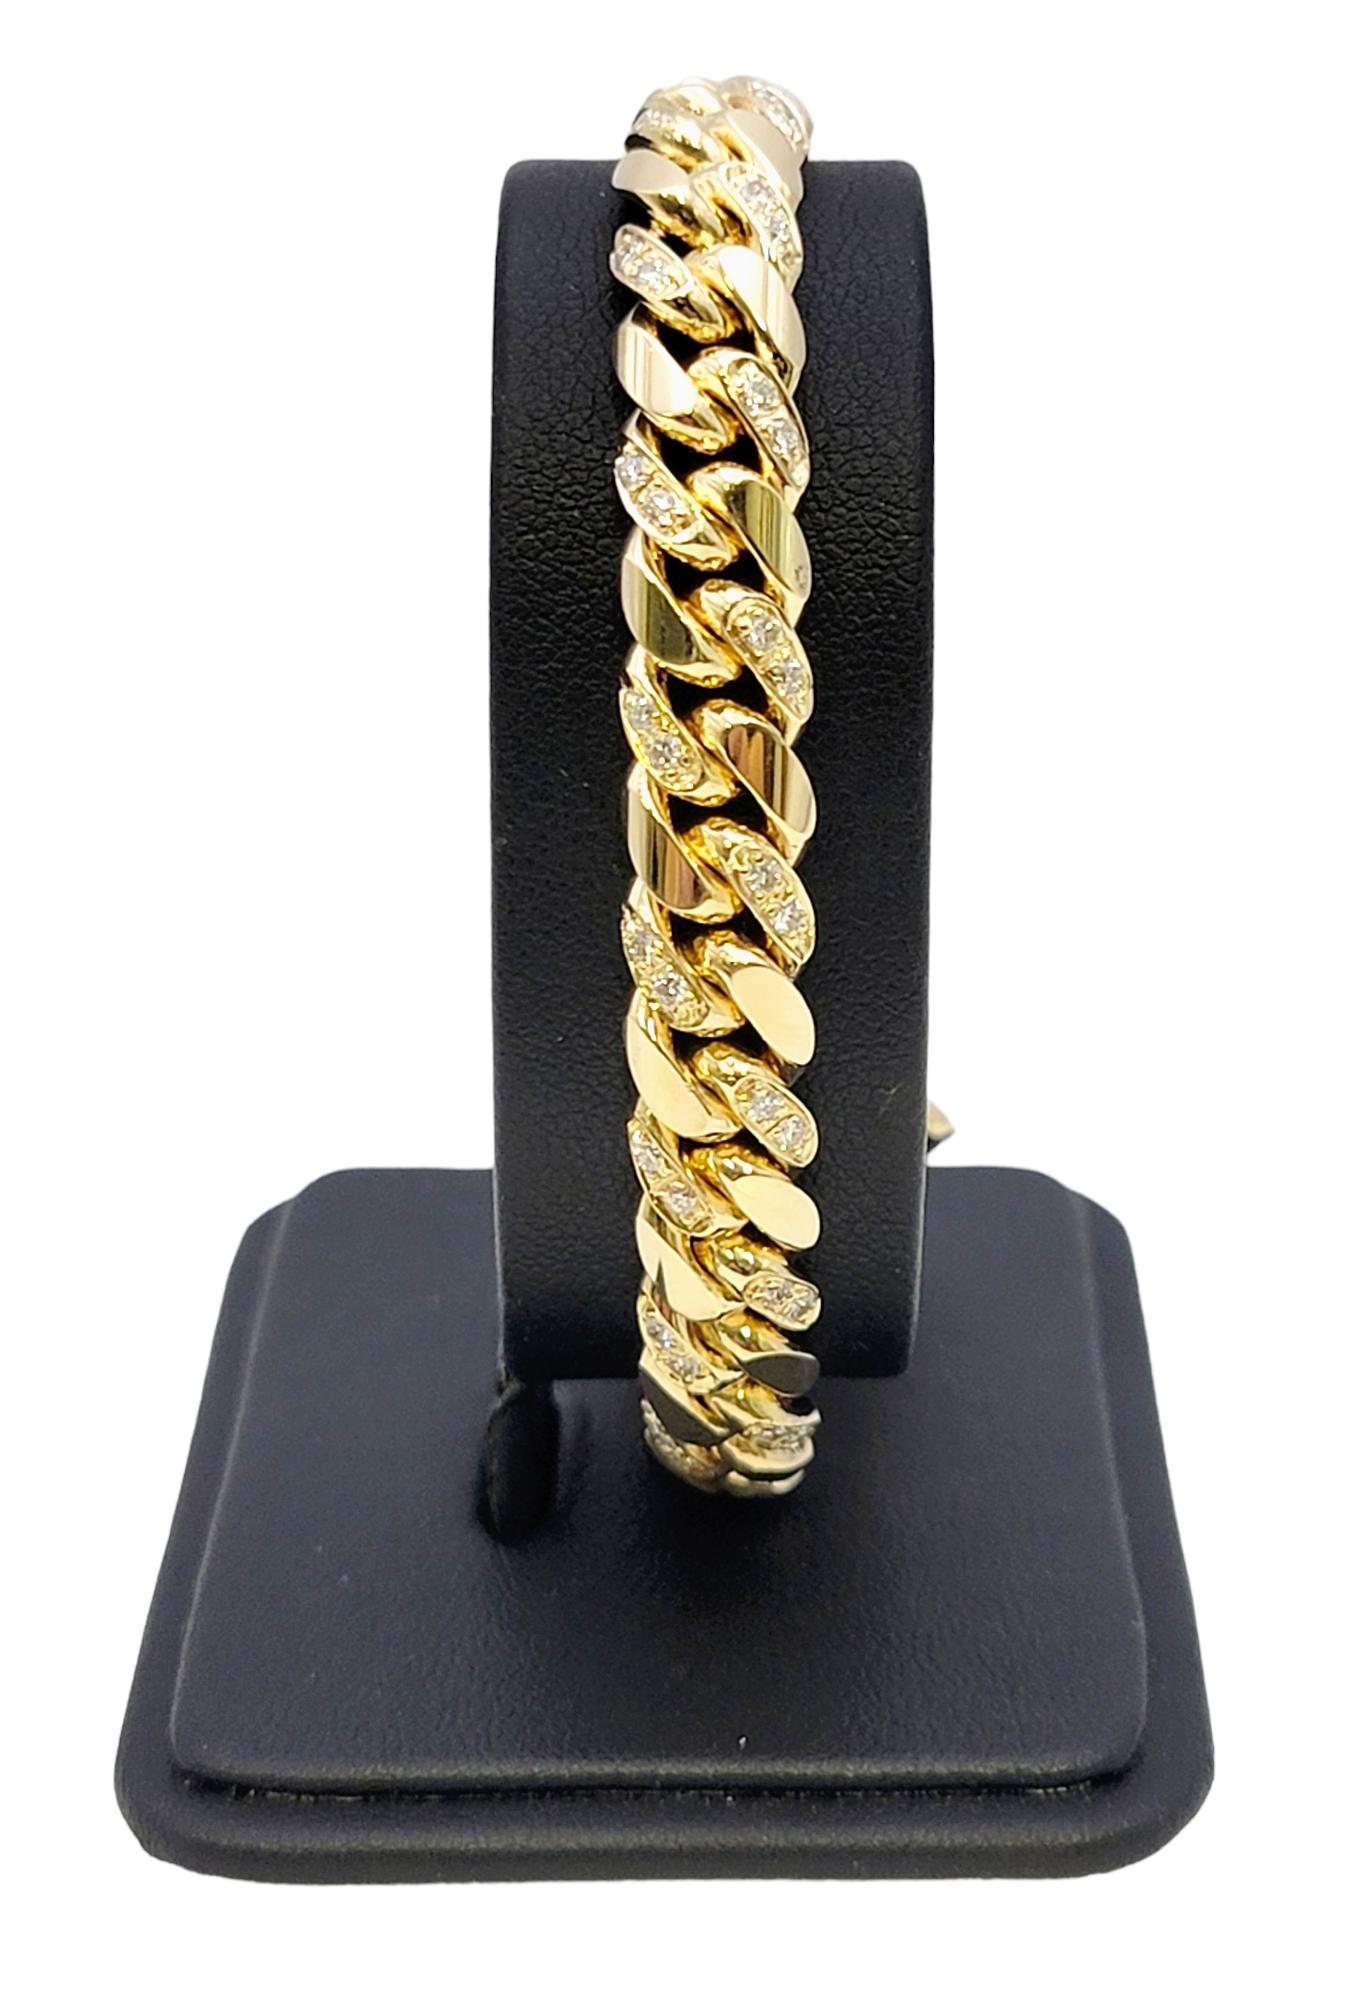 Unisex 14 Karat Yellow Gold Curb Link Bracelet with Pave Diamond Accents For Sale 7